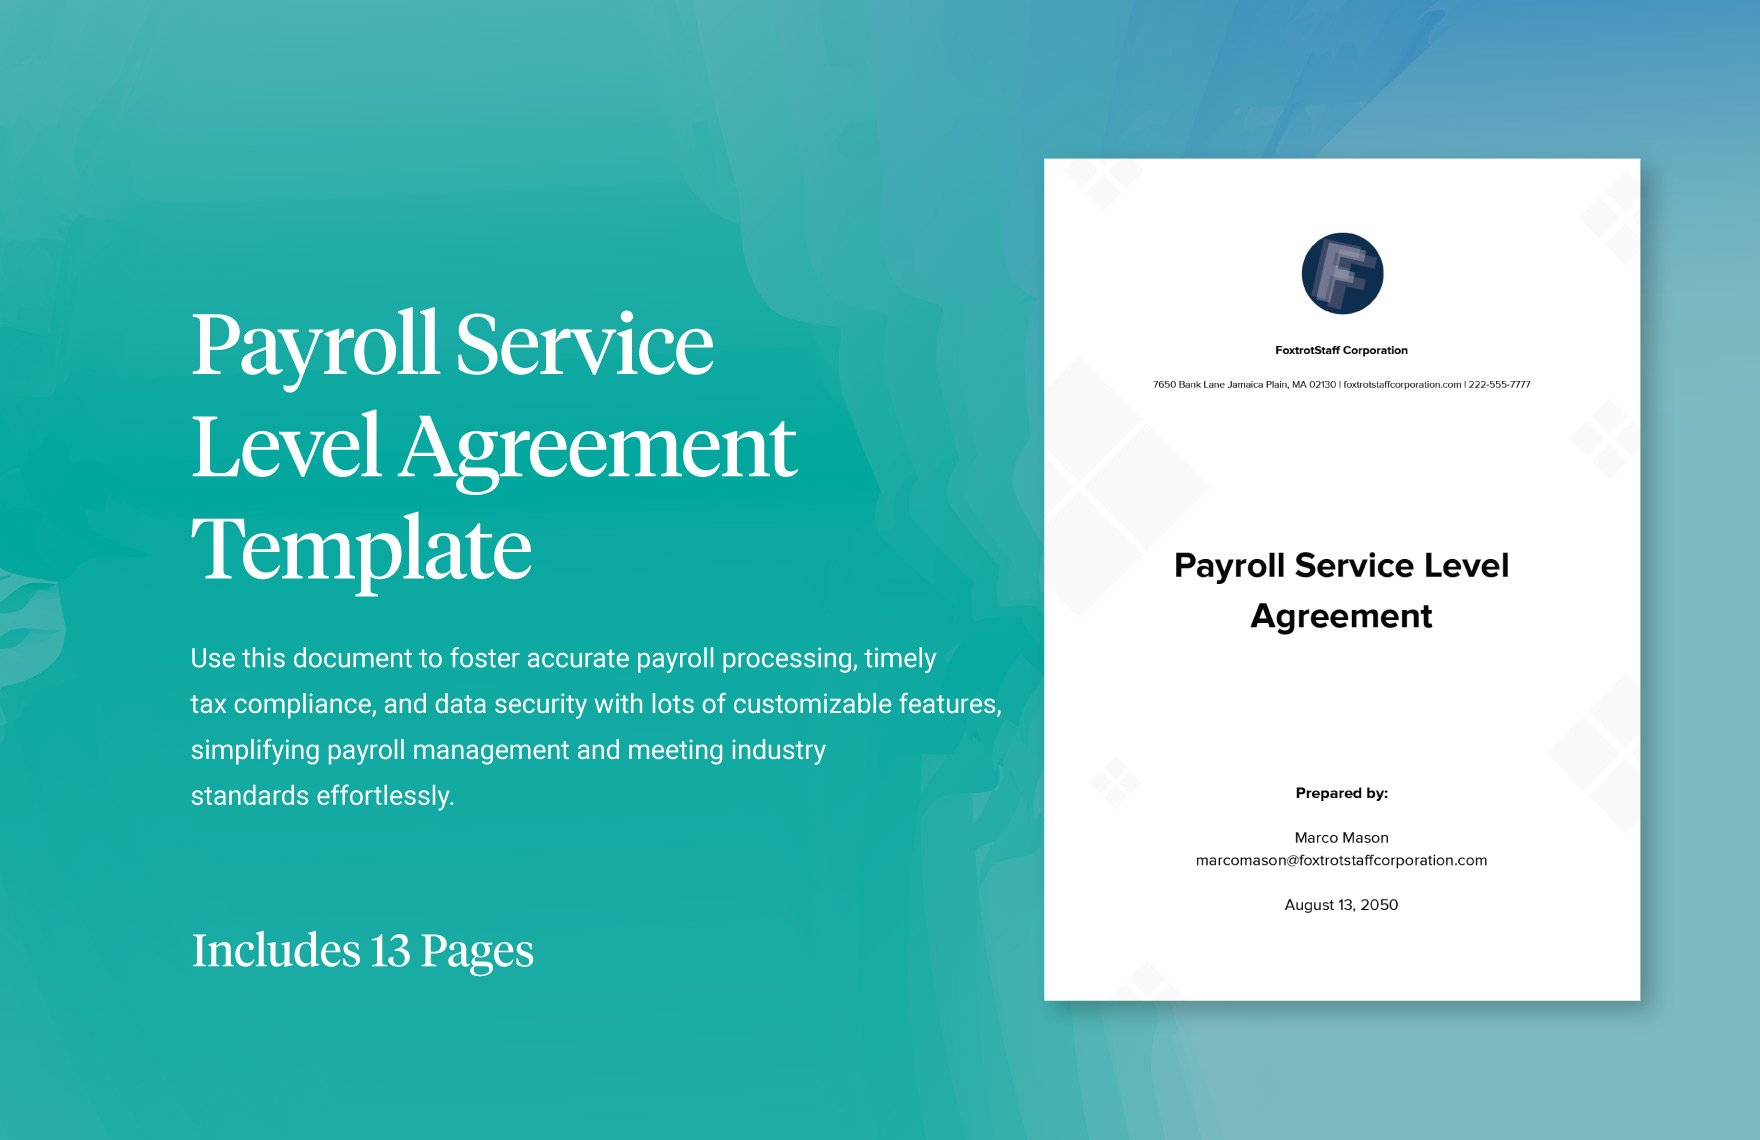 Payroll Service Level Agreement Template